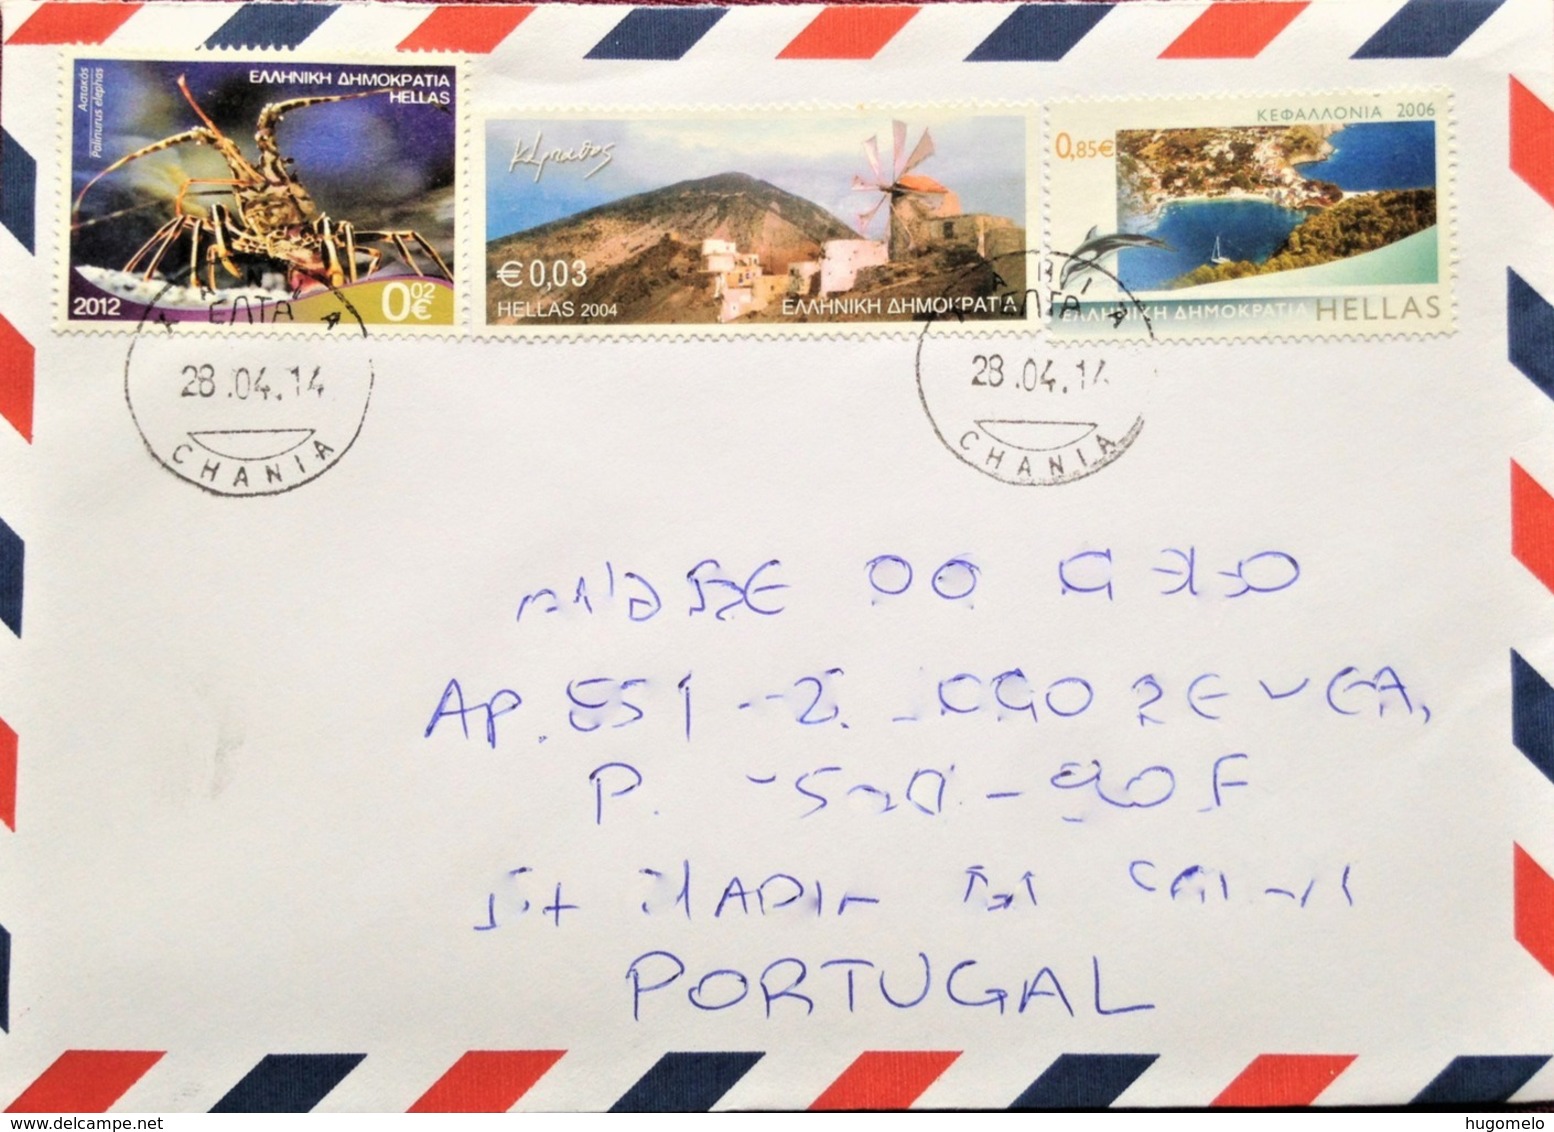 Greece, Circulated Cover To Portugal, "Windmills", "Crustaceans", "Lobsters", "Landscapes", "Kefalonia Island", 2014 - Brieven En Documenten